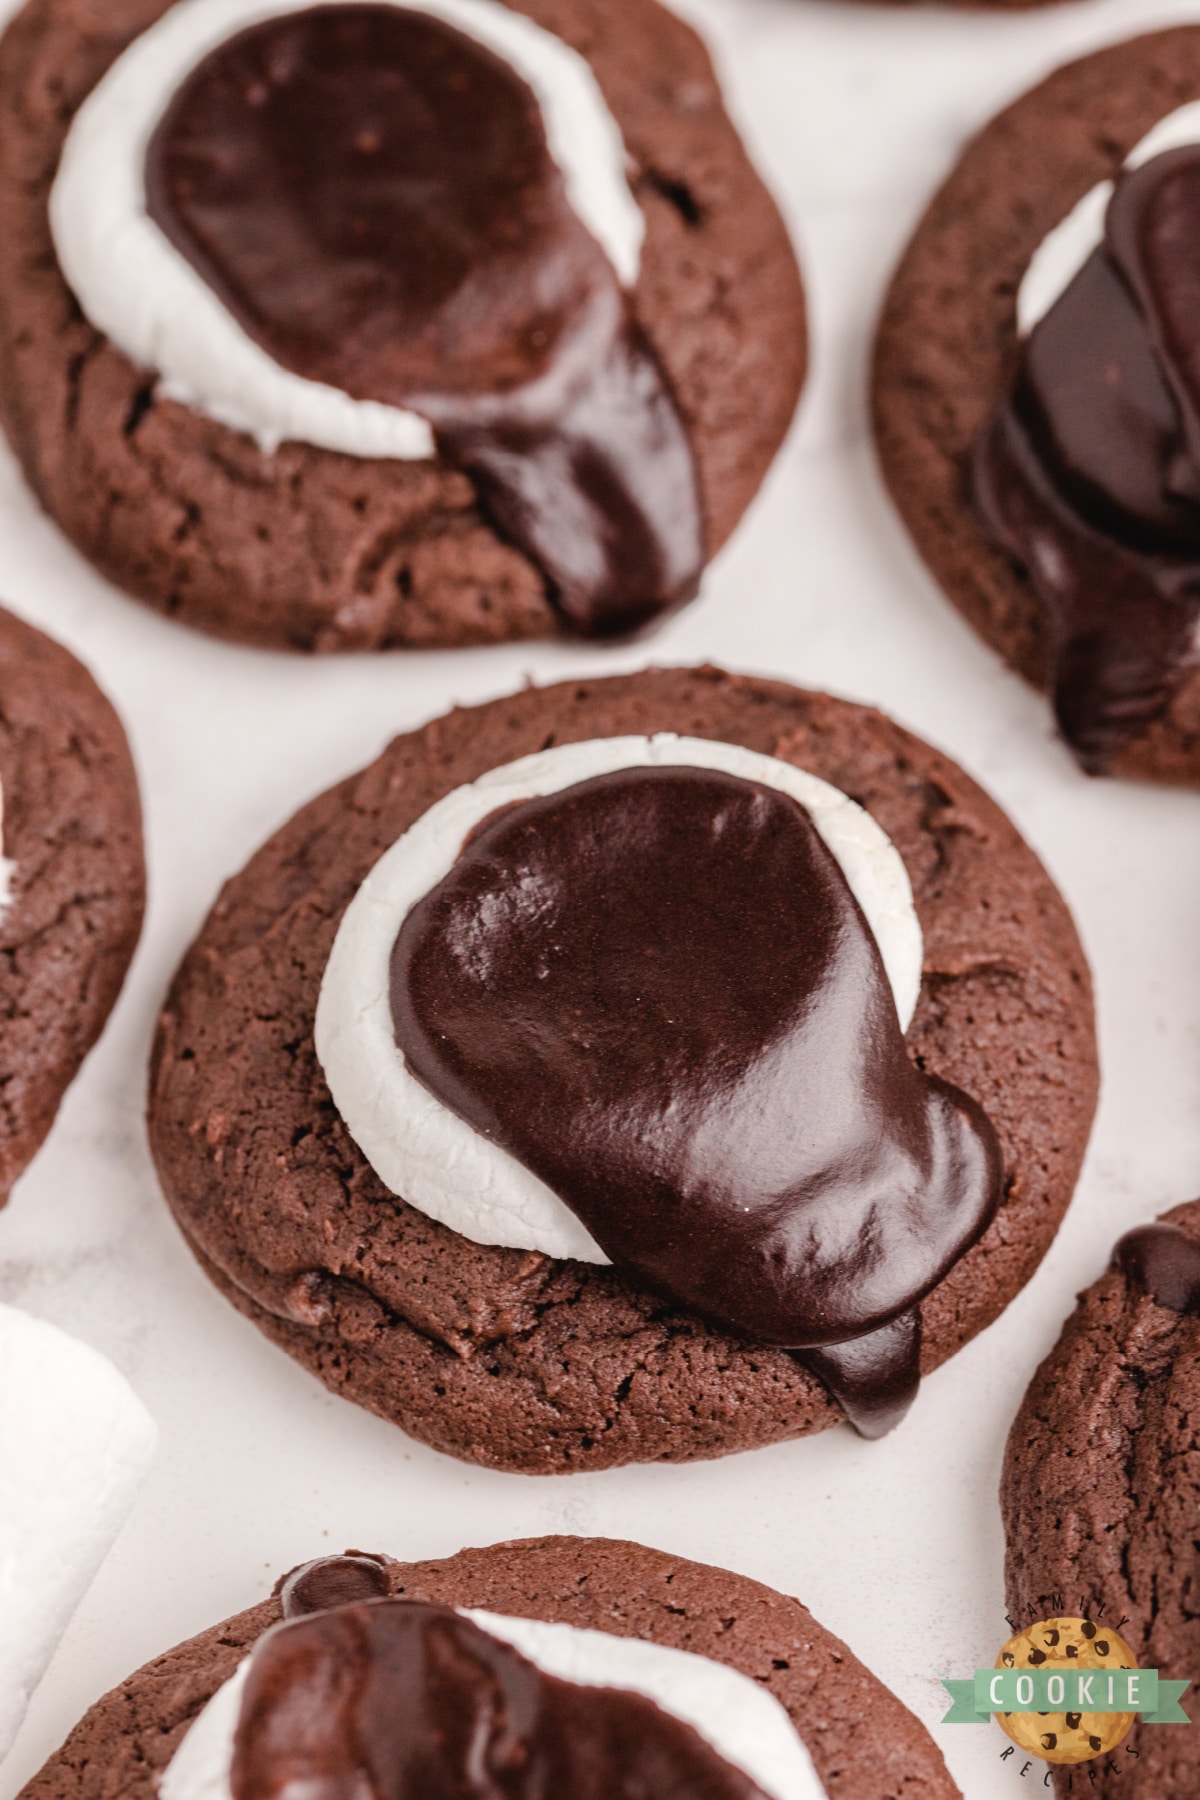 Chocolate Marshmallow Cookies are soft and thick chocolate cookies topped with a marshmallow and chocolate icing. Delicious chocolate cookie recipe with marshmallow.